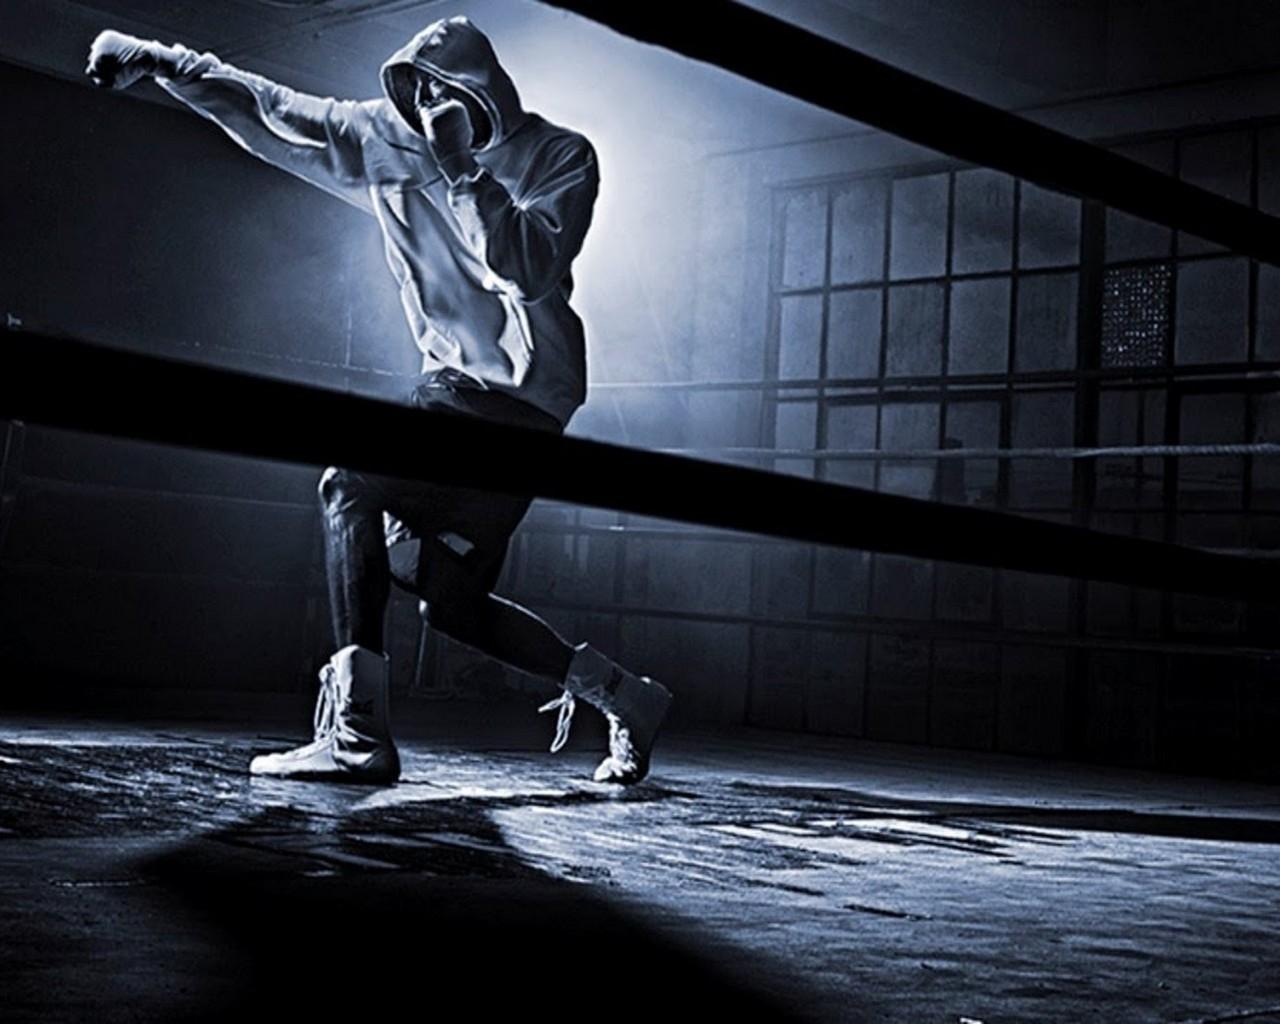 Boxing Wallpaper HD for Android - APK Download